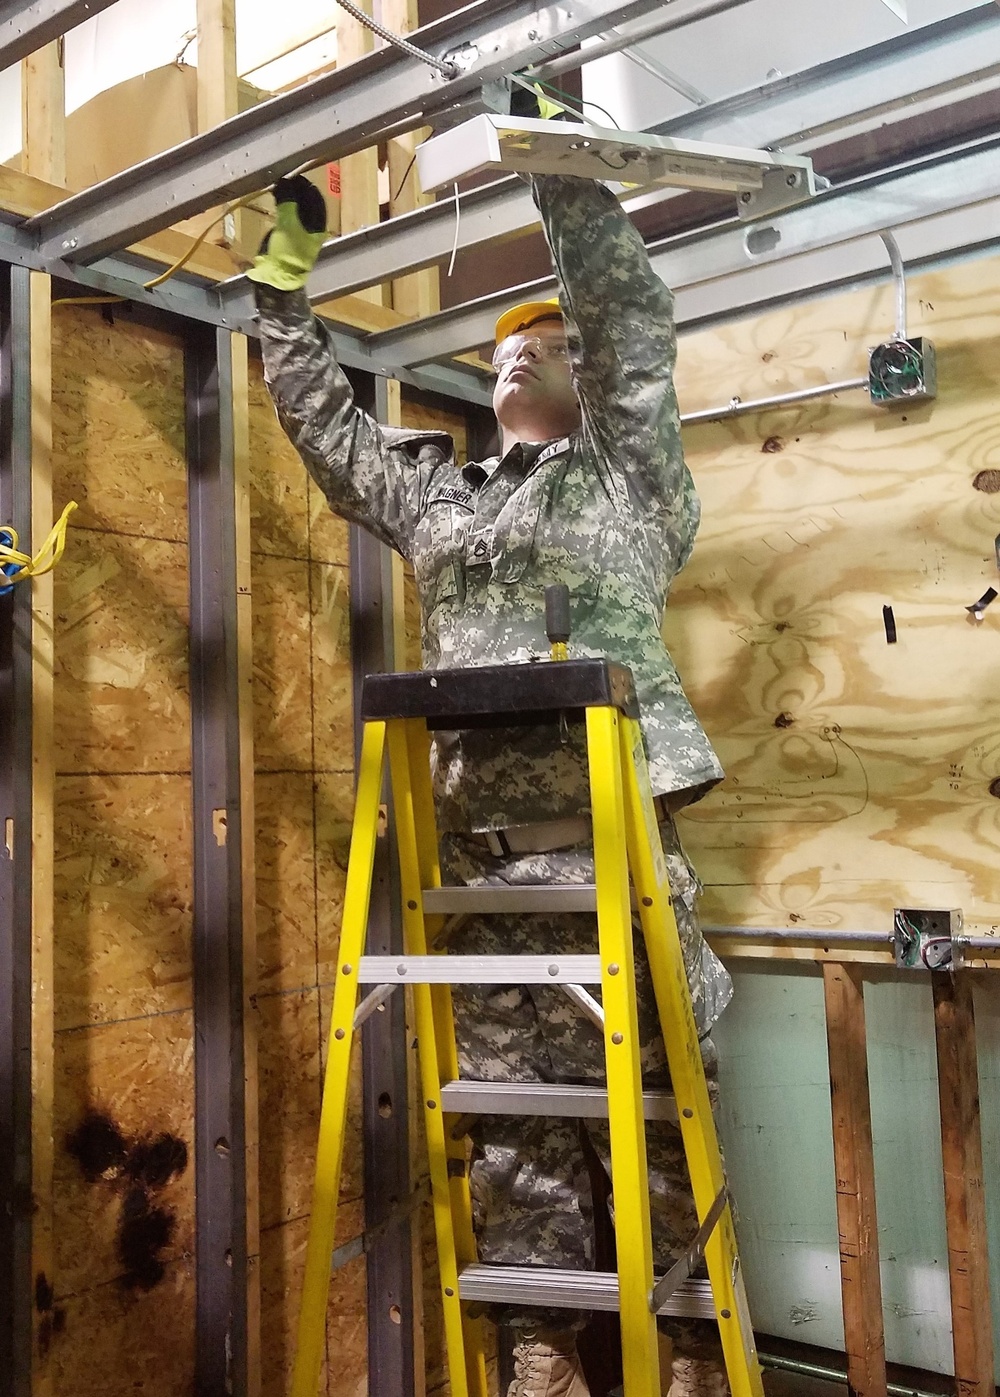 ‘Light me up:’ Soldiers power through Interior Electrician training